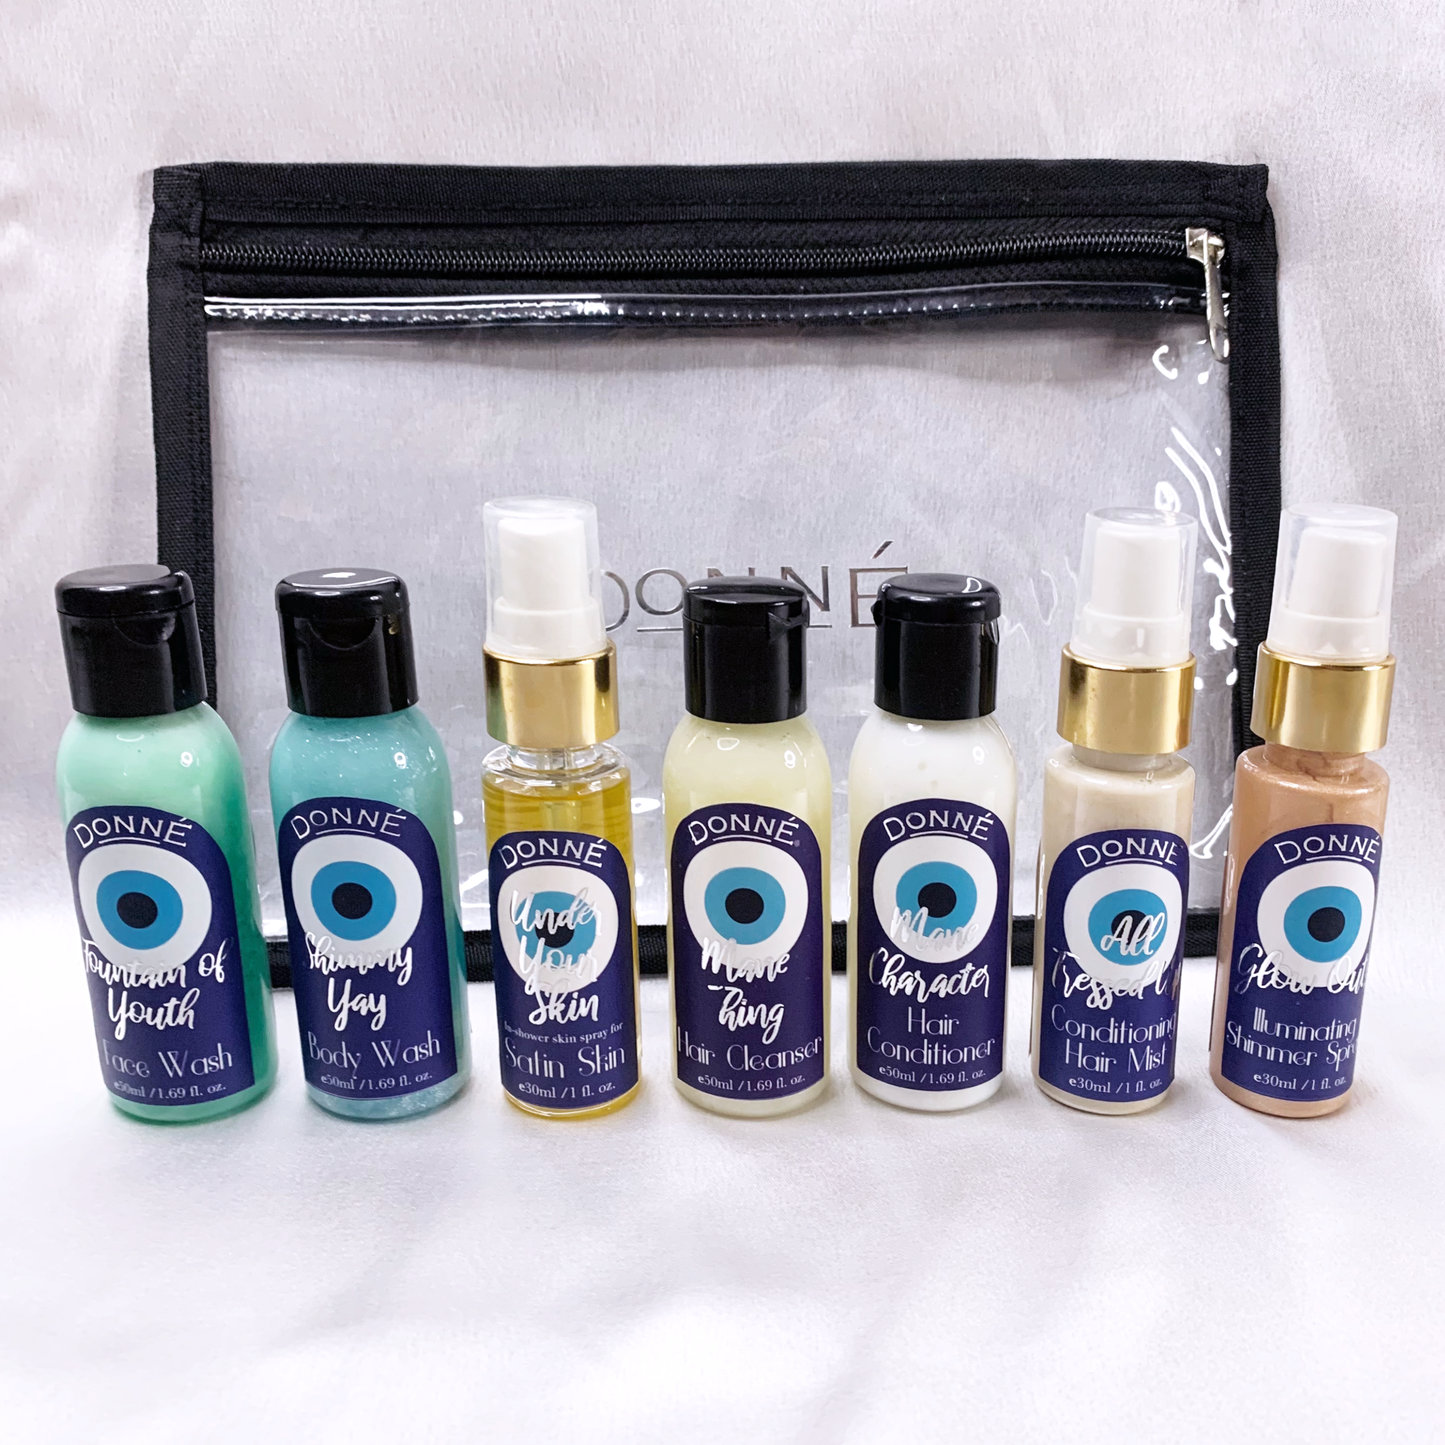 face wash, body wash, conditioner, shampoo, moisturising spray shimmer spray and a hair serum mist in front of a travel pouch